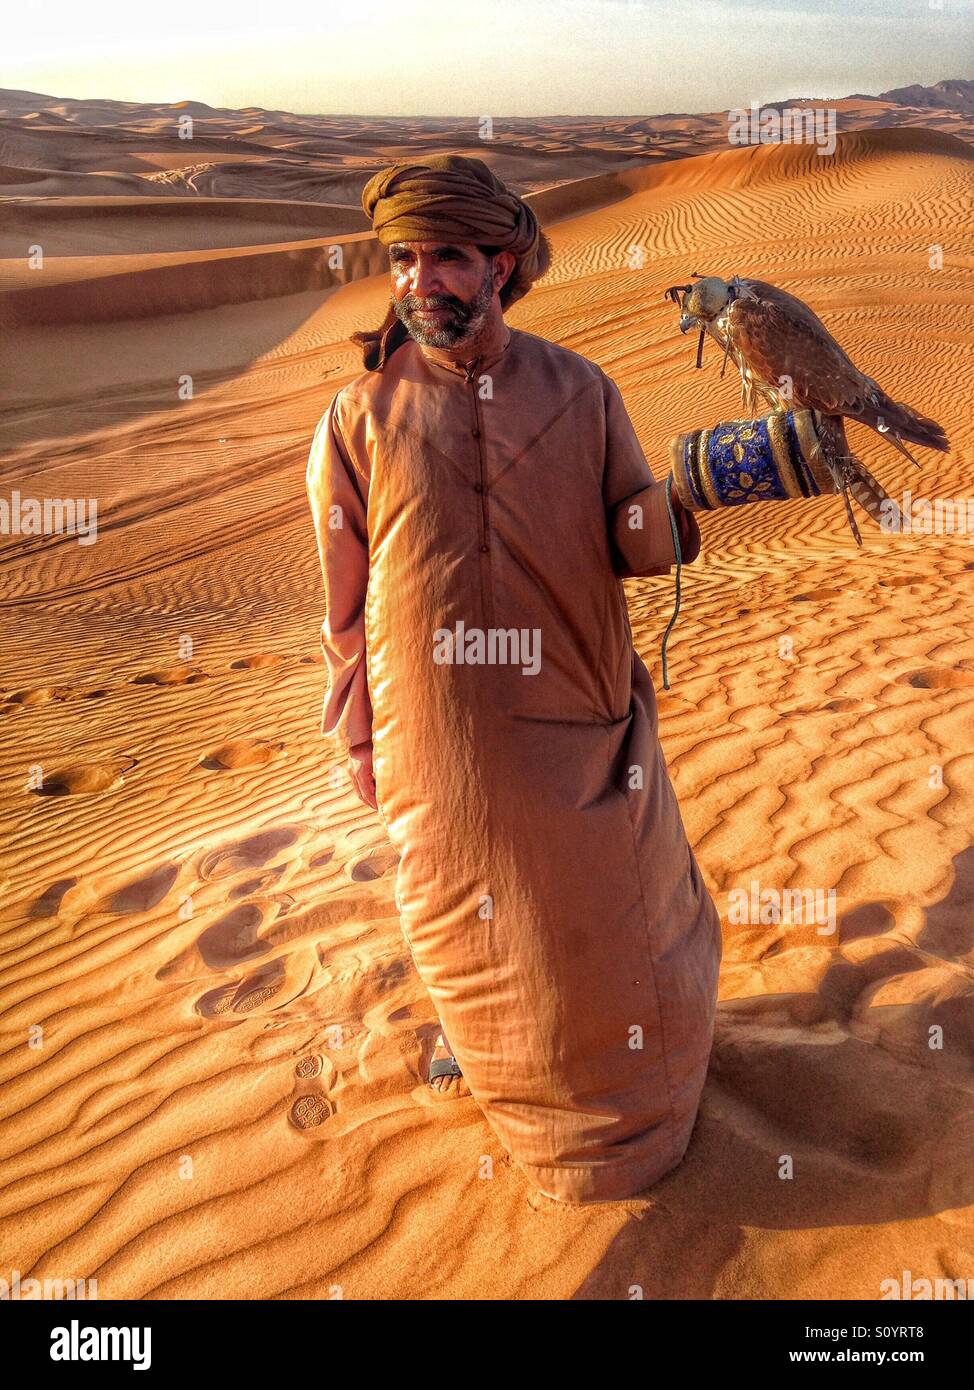 Middle aged man holding a falcon in the dessert Stock Photo